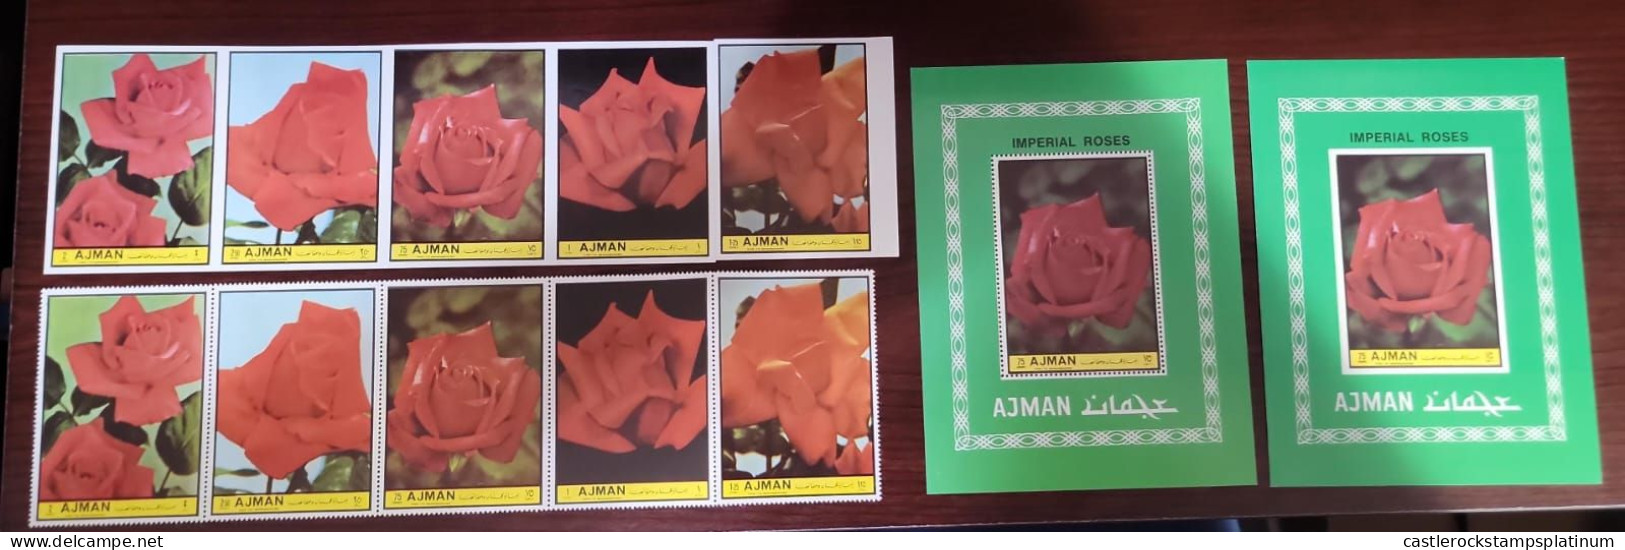 O) 1972 AJMAN, PERFORATE AND IMPERFORATE, FLOWERS - IMPERIAL ROSES, MNH - Adschman